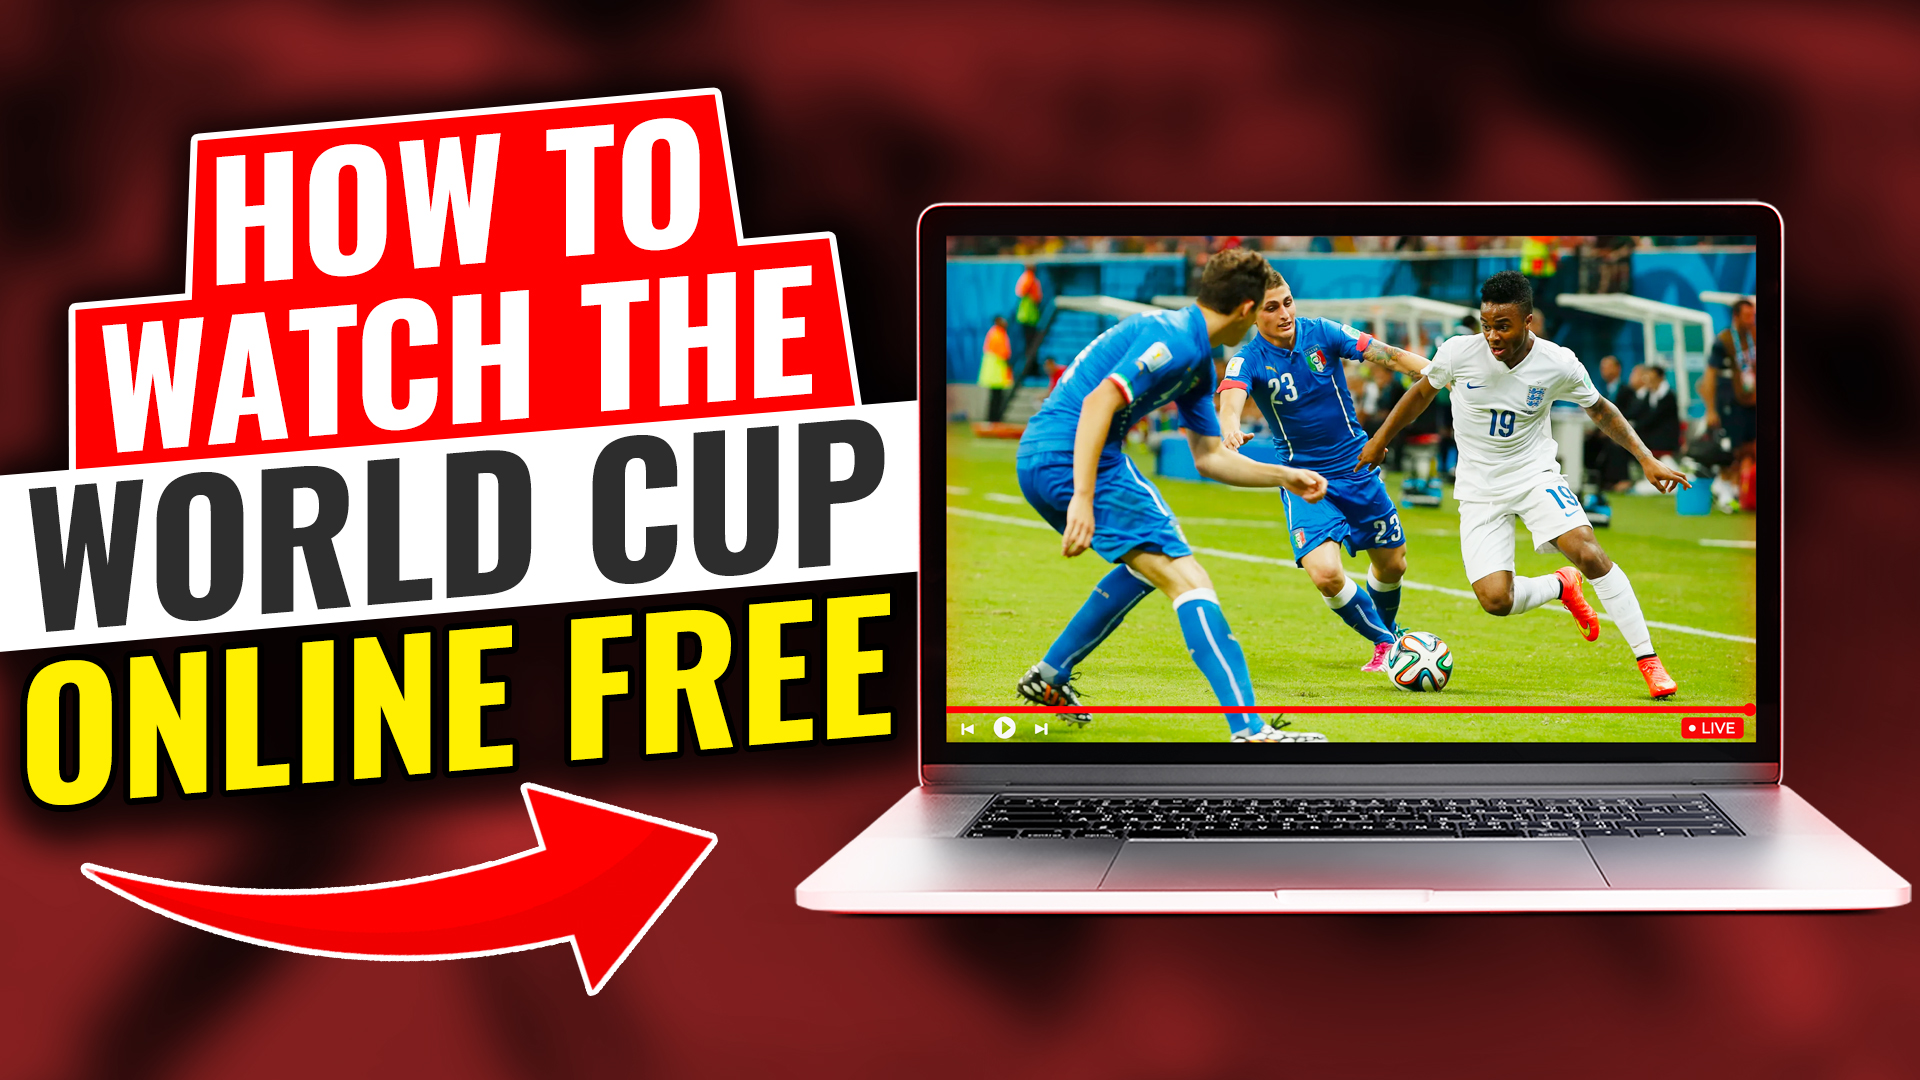 How To Watch The FIFA World Cup Qatar 2022 Online Free